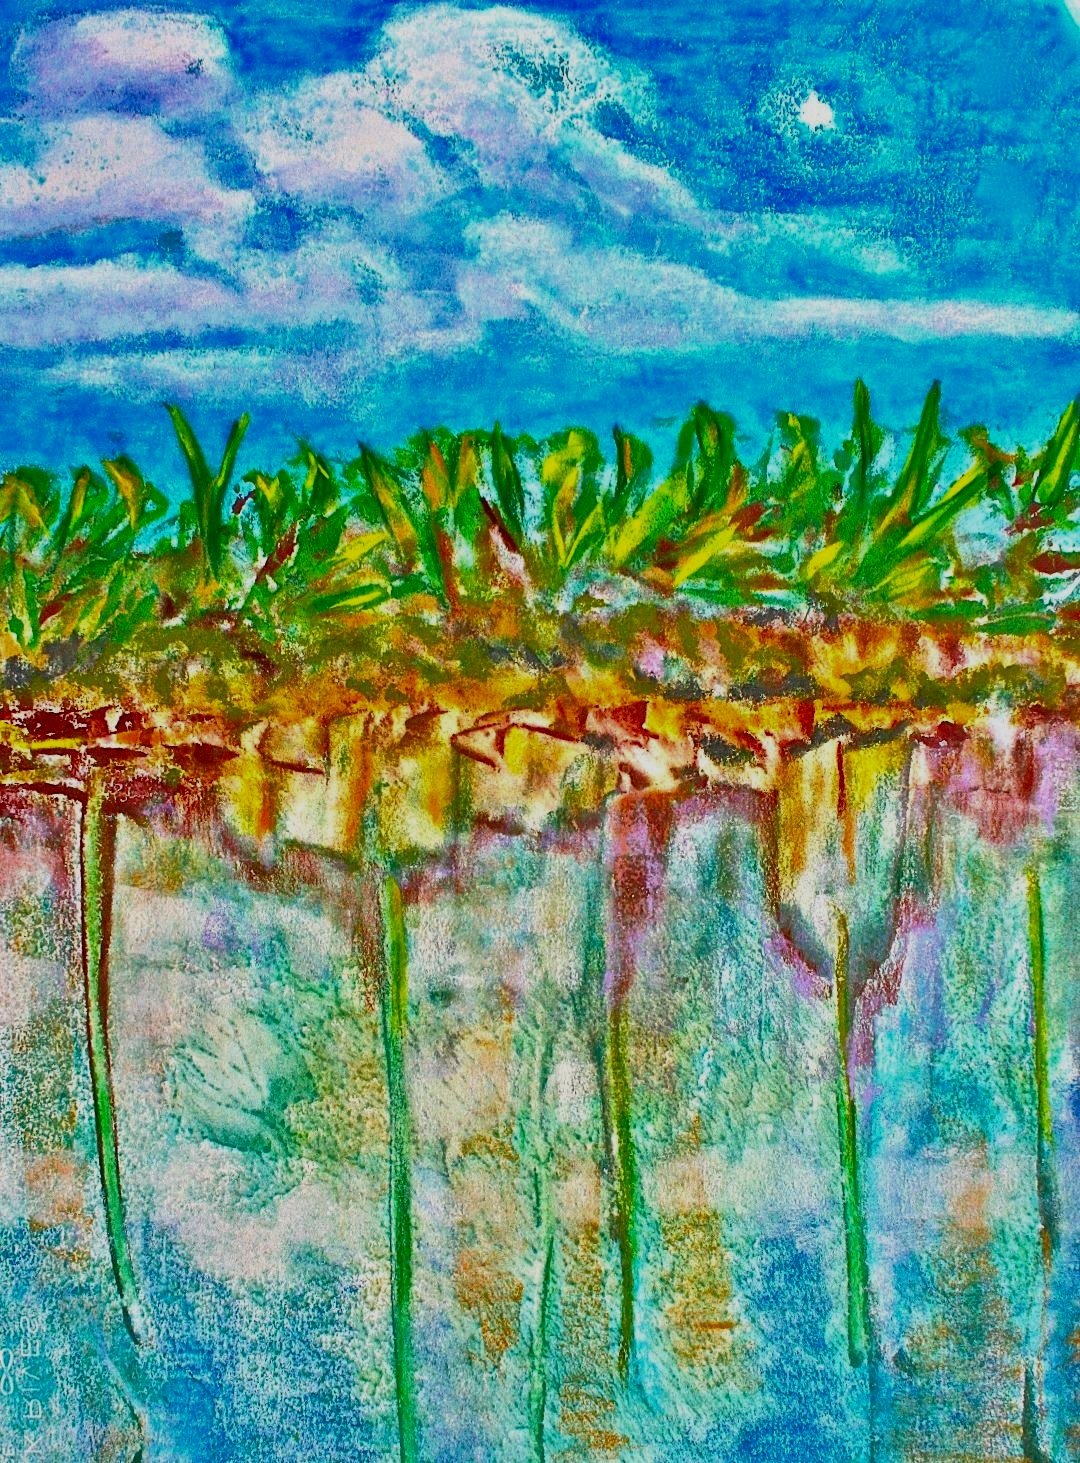 "Everglades Waterline II" by Susana Youngsteadt